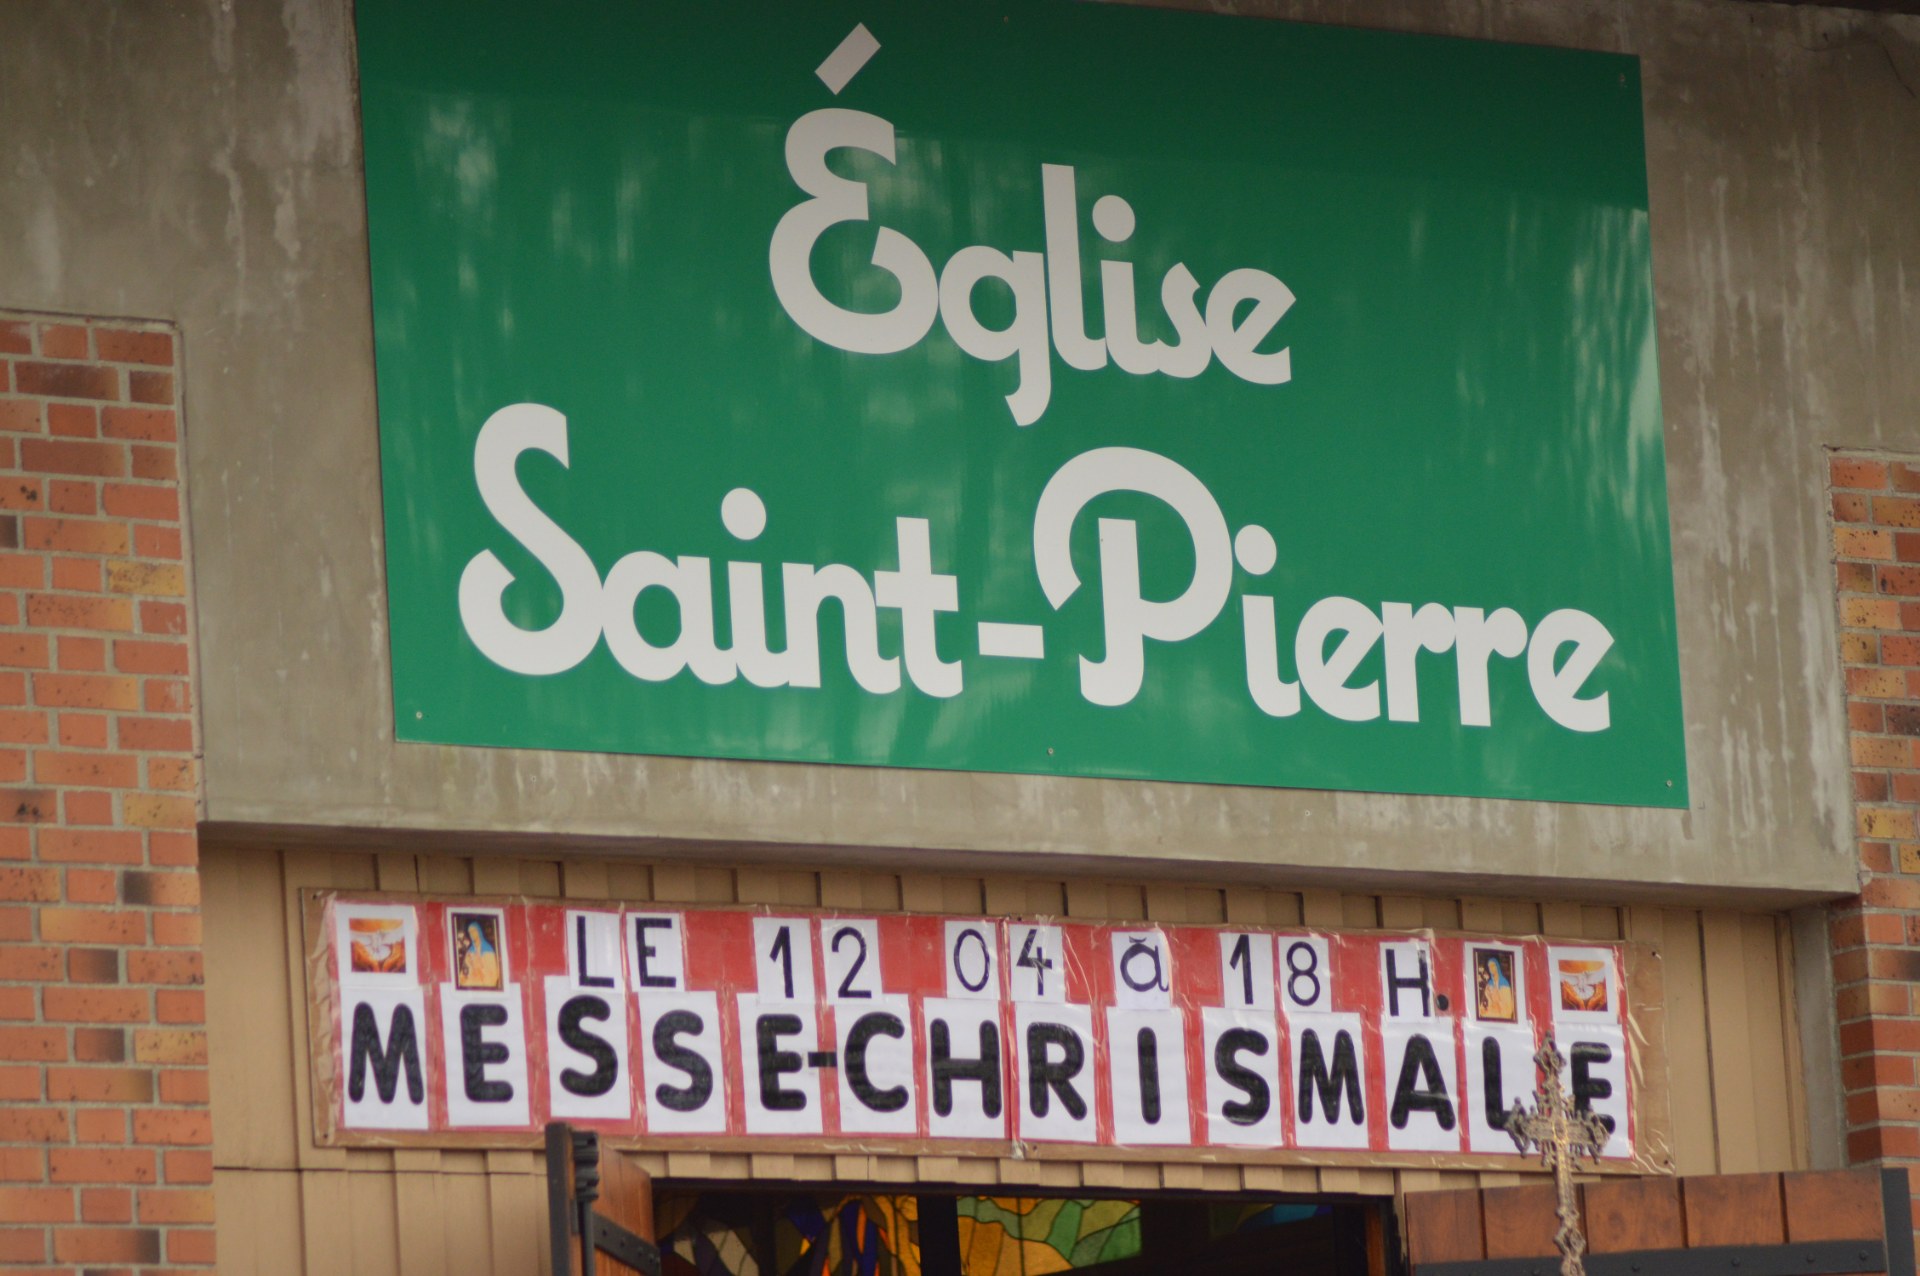 messe chrismale